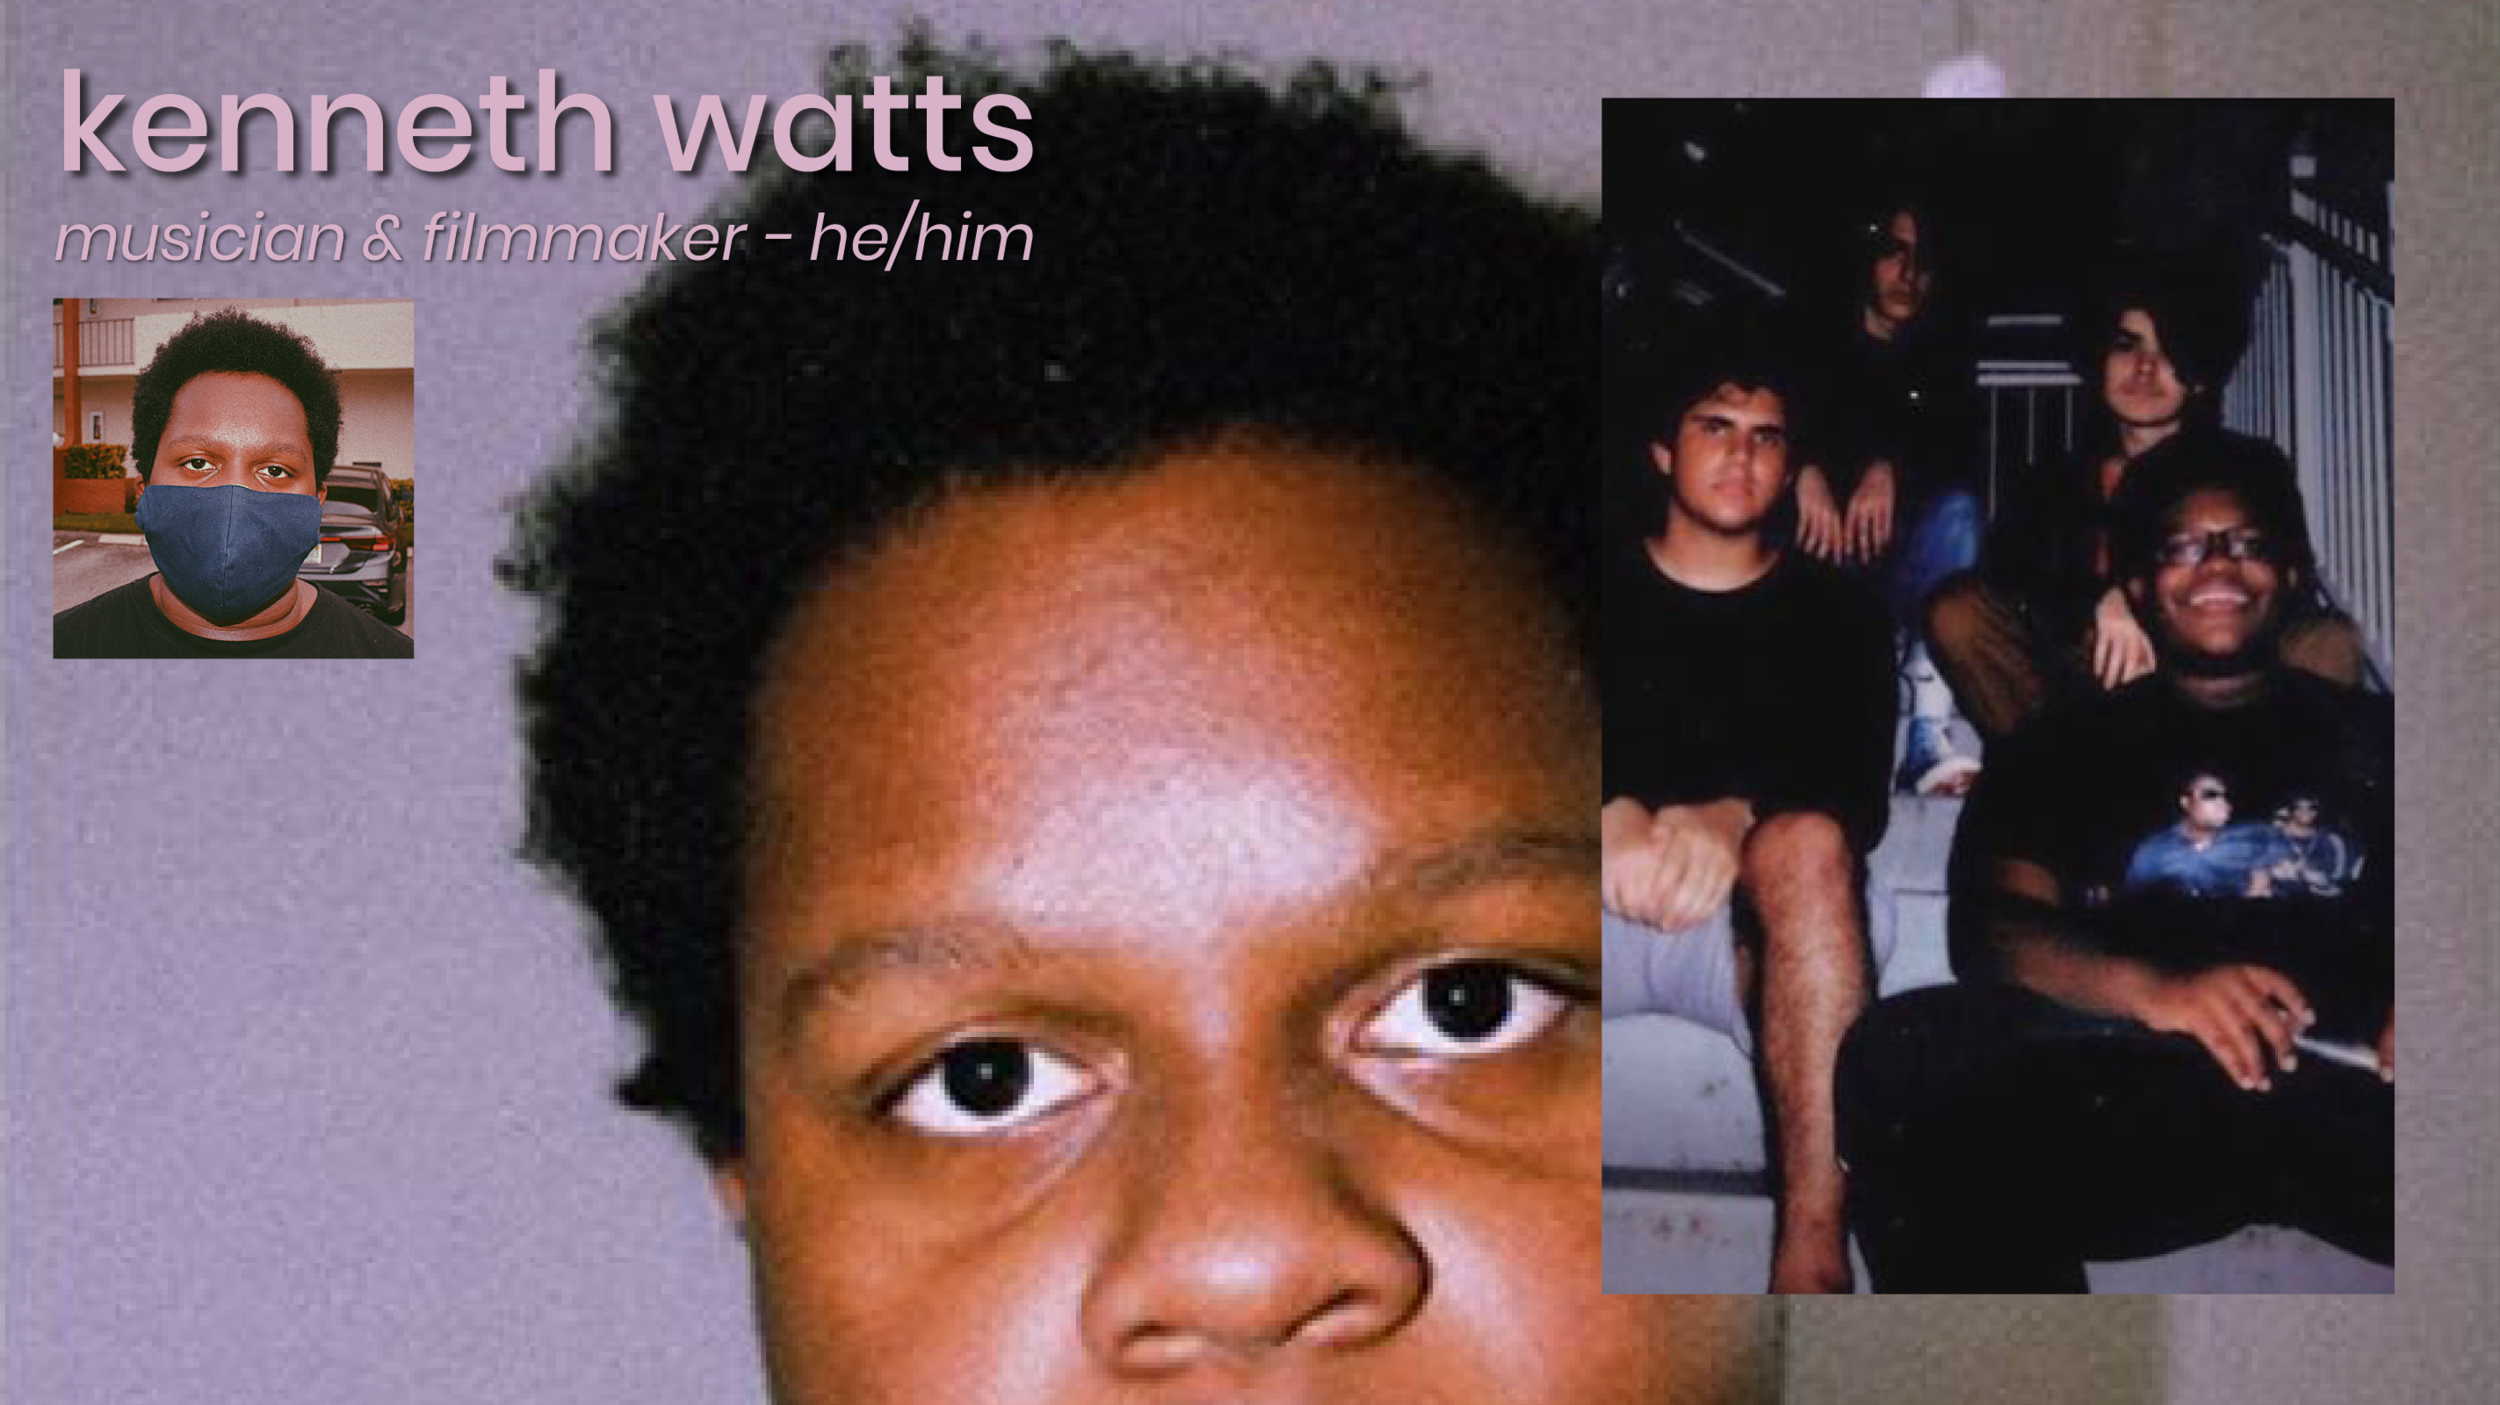 kenneth watts_1.png